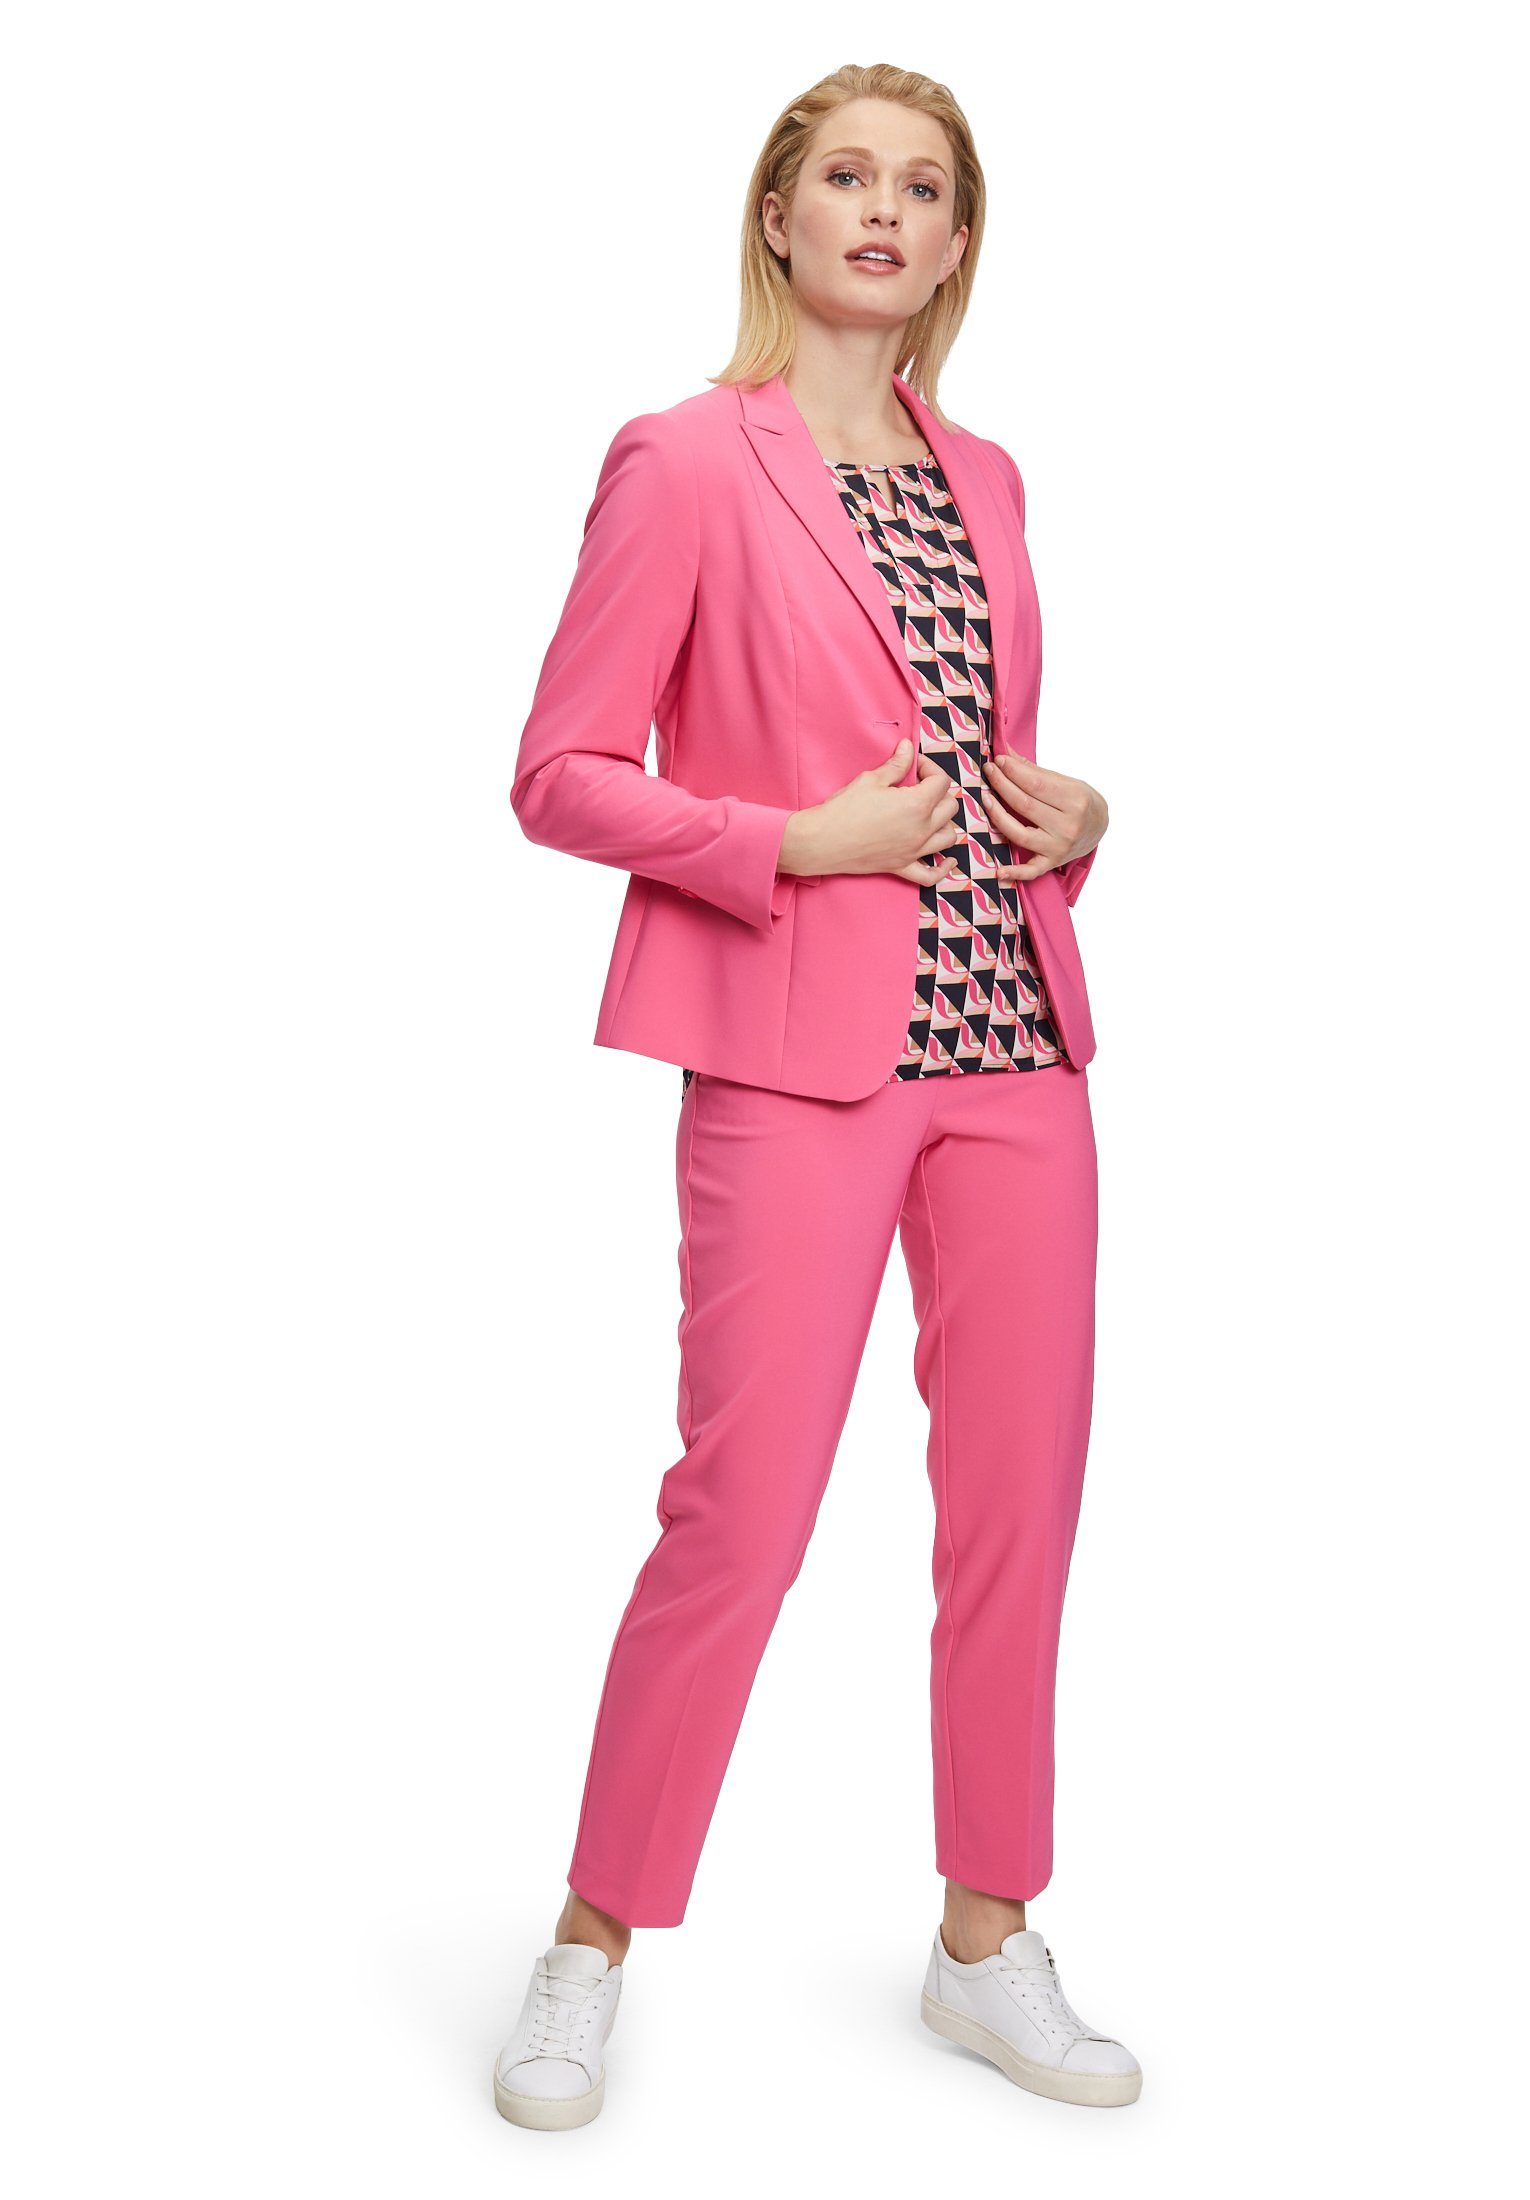 mit Muster Bluse Rosa Klassische Barclay Betty Muster